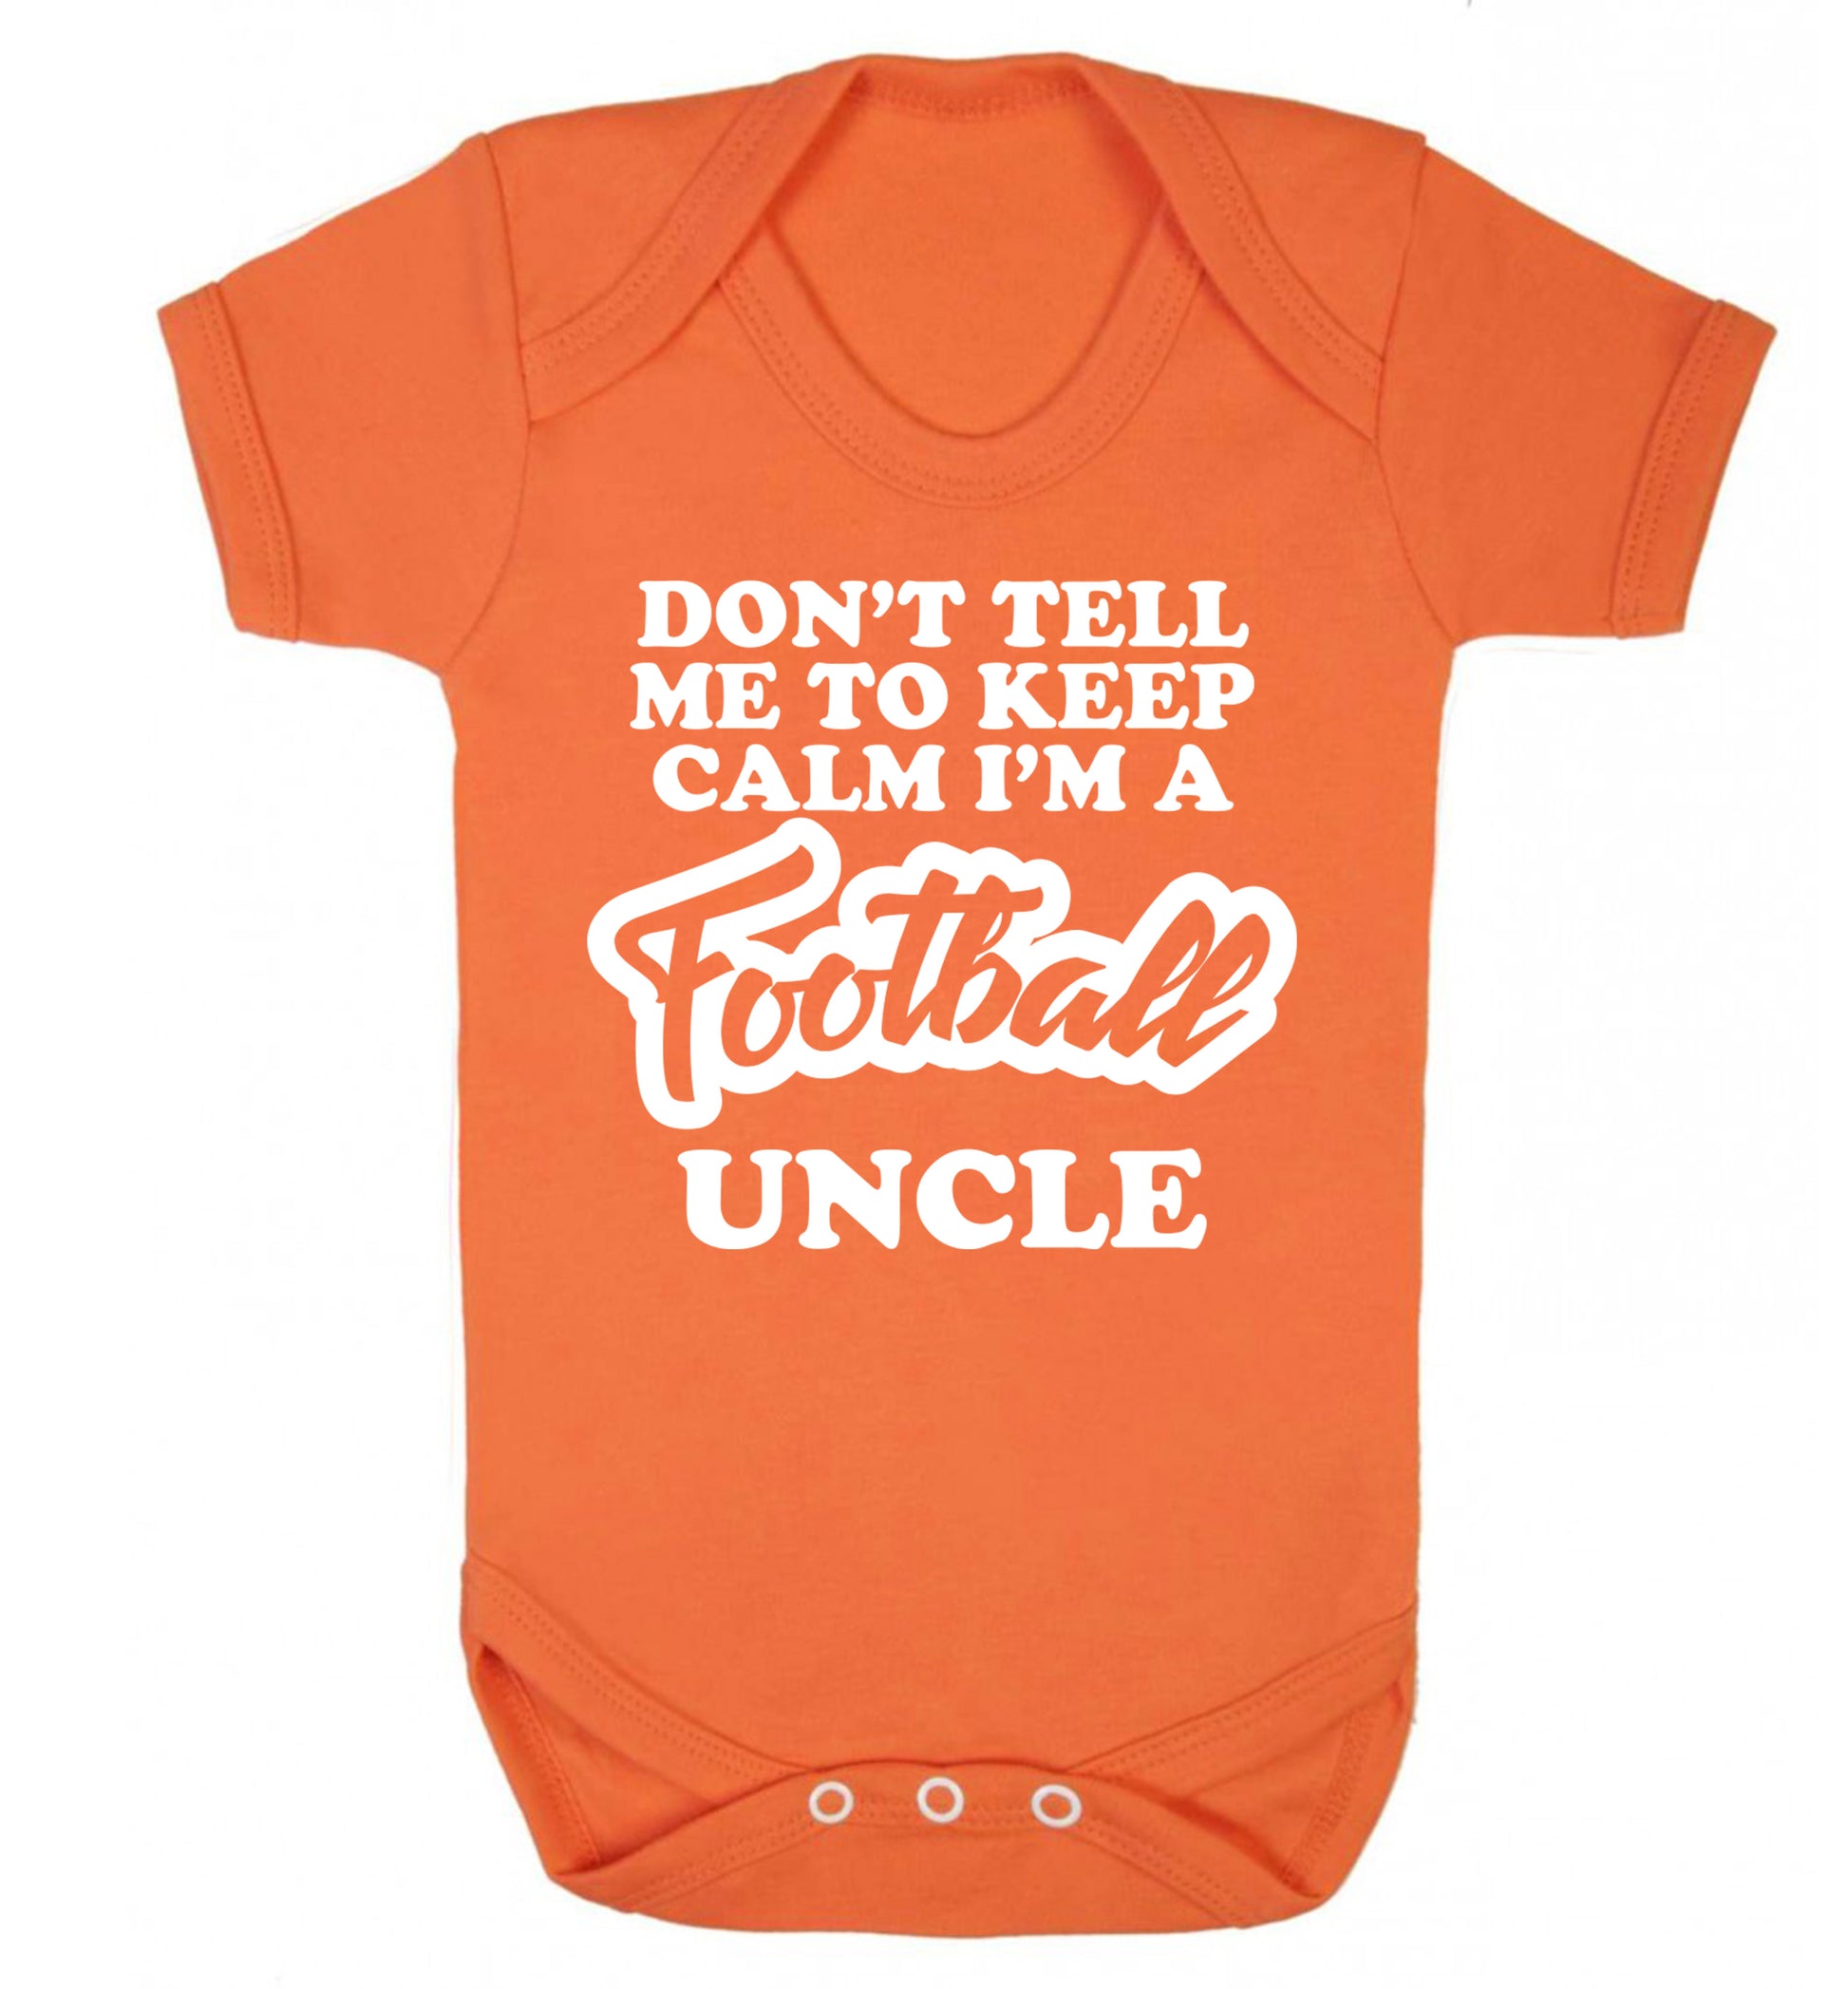 Don't tell me to keep calm I'm a football uncle Baby Vest orange 18-24 months